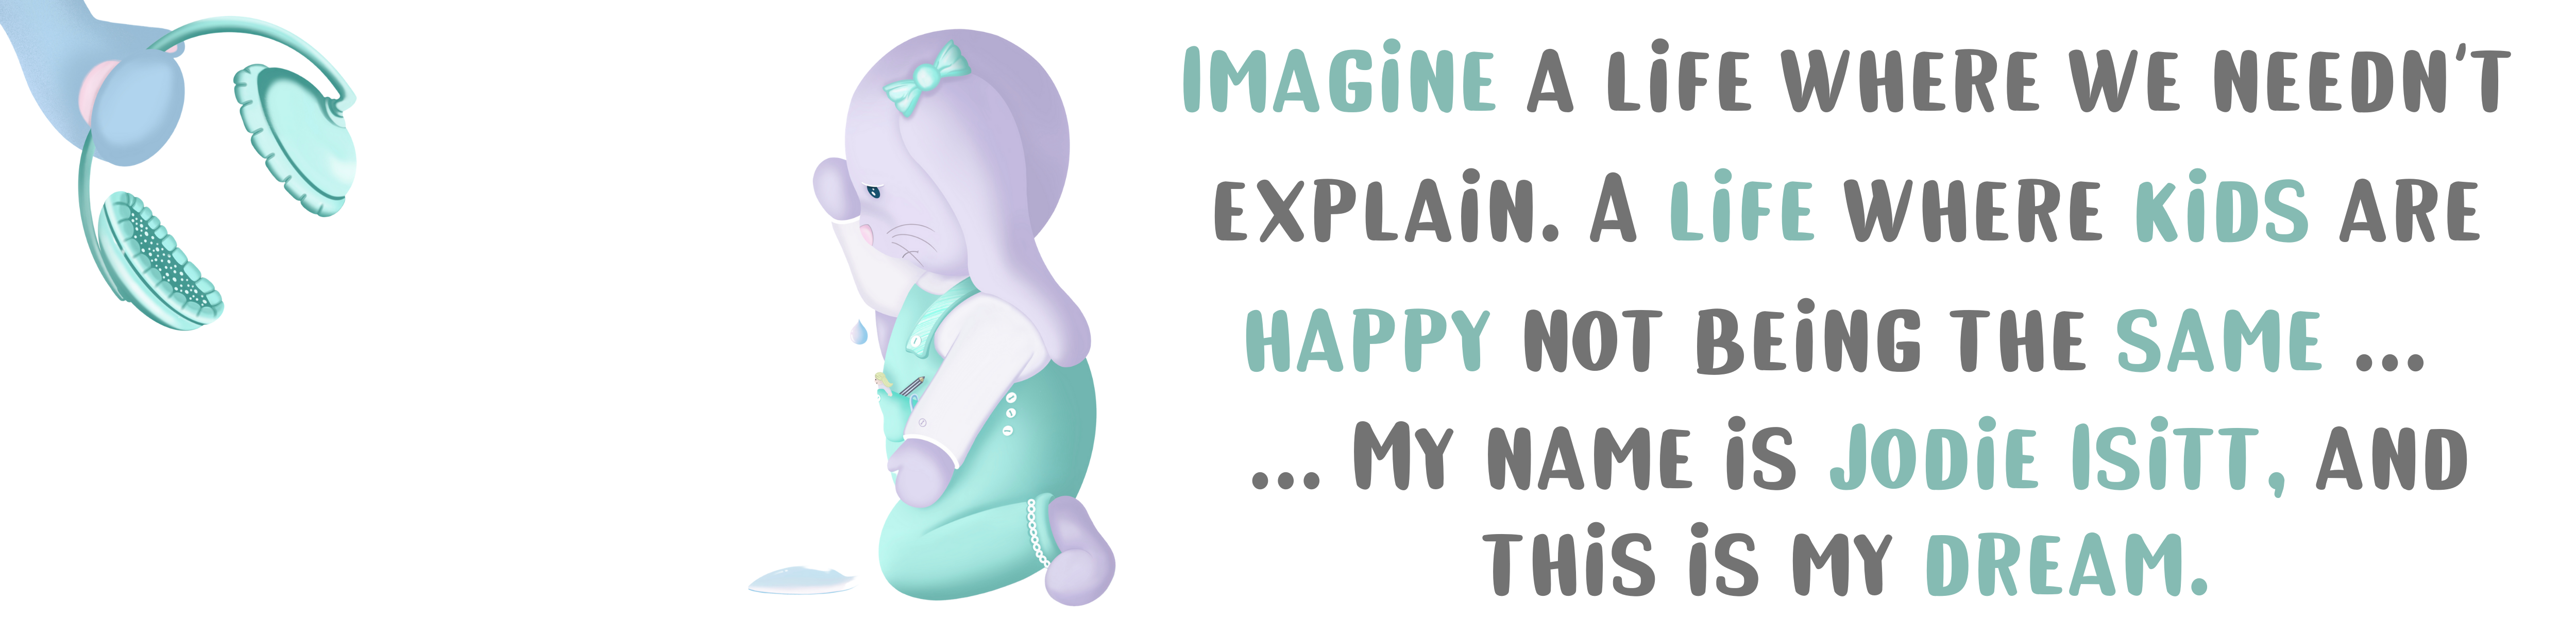 Imagine a life where we needn't explain. A life where kids are happy not being the same... ...My name is Jodie Isitt, and this is my dream.